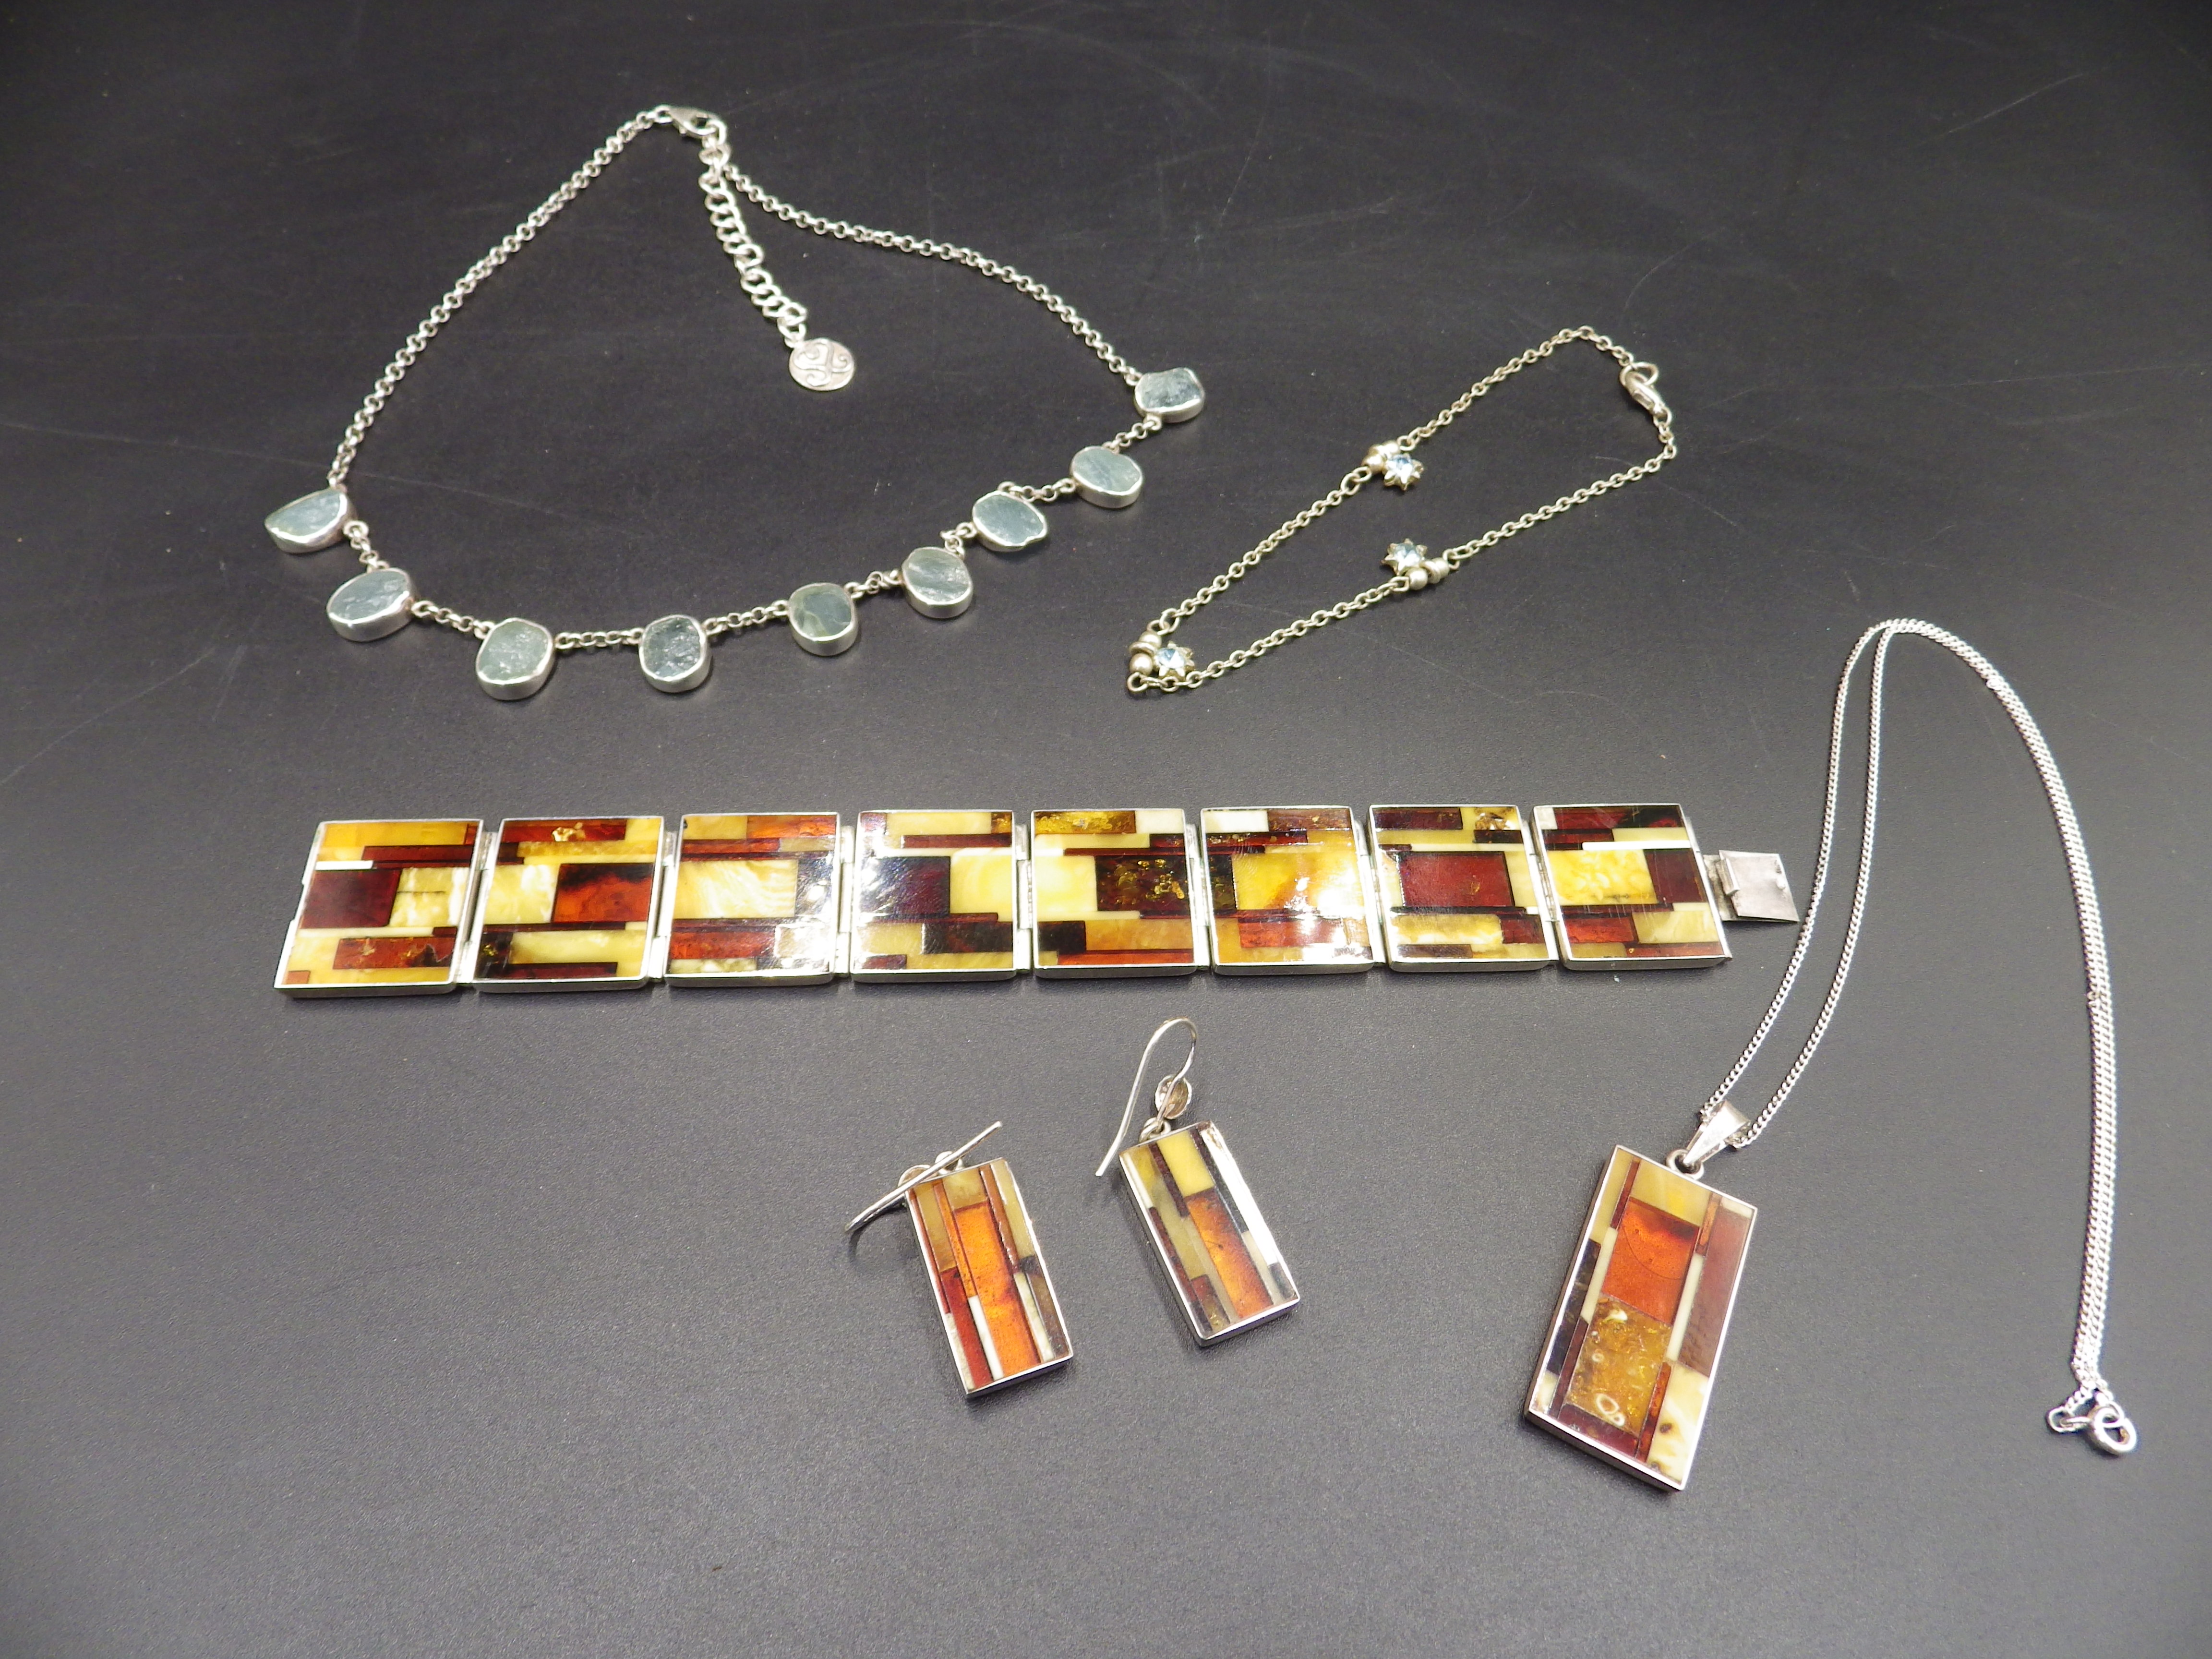 Sterling silver and Baltic amber pendant necklace, bracelet and earings, plus a sterling silver